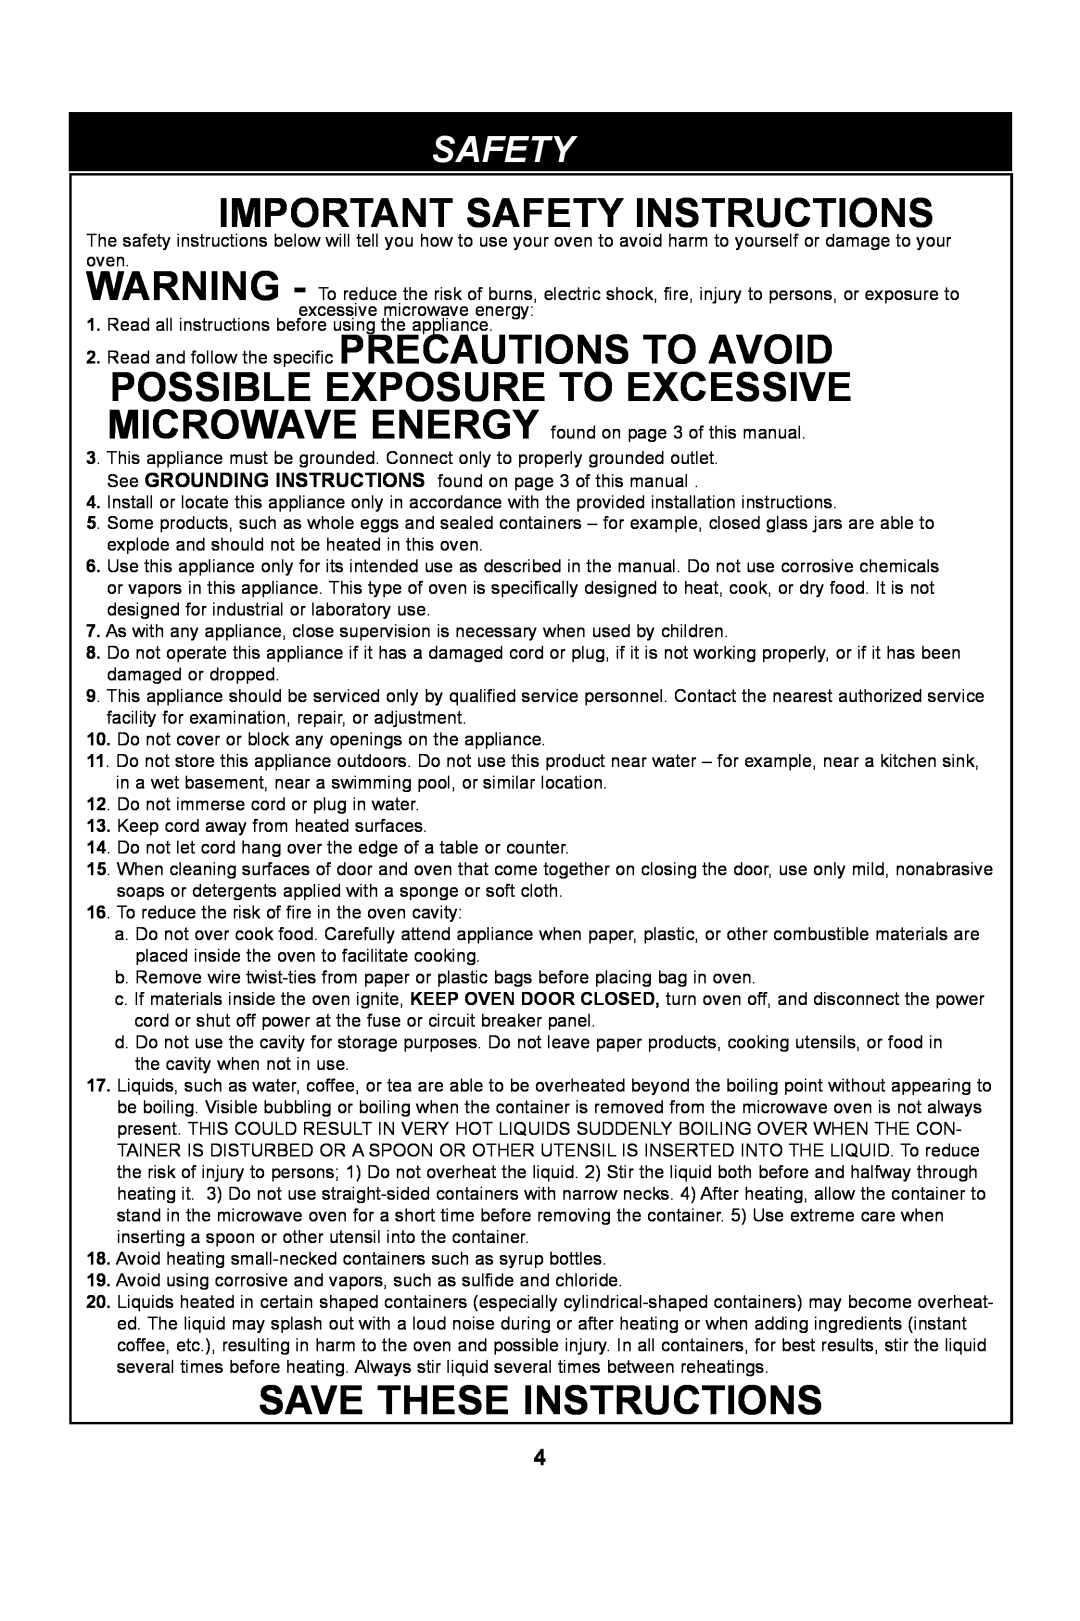 LG Electronics LPRM1270ST manual Important Safety Instructions, Save These Instructions 